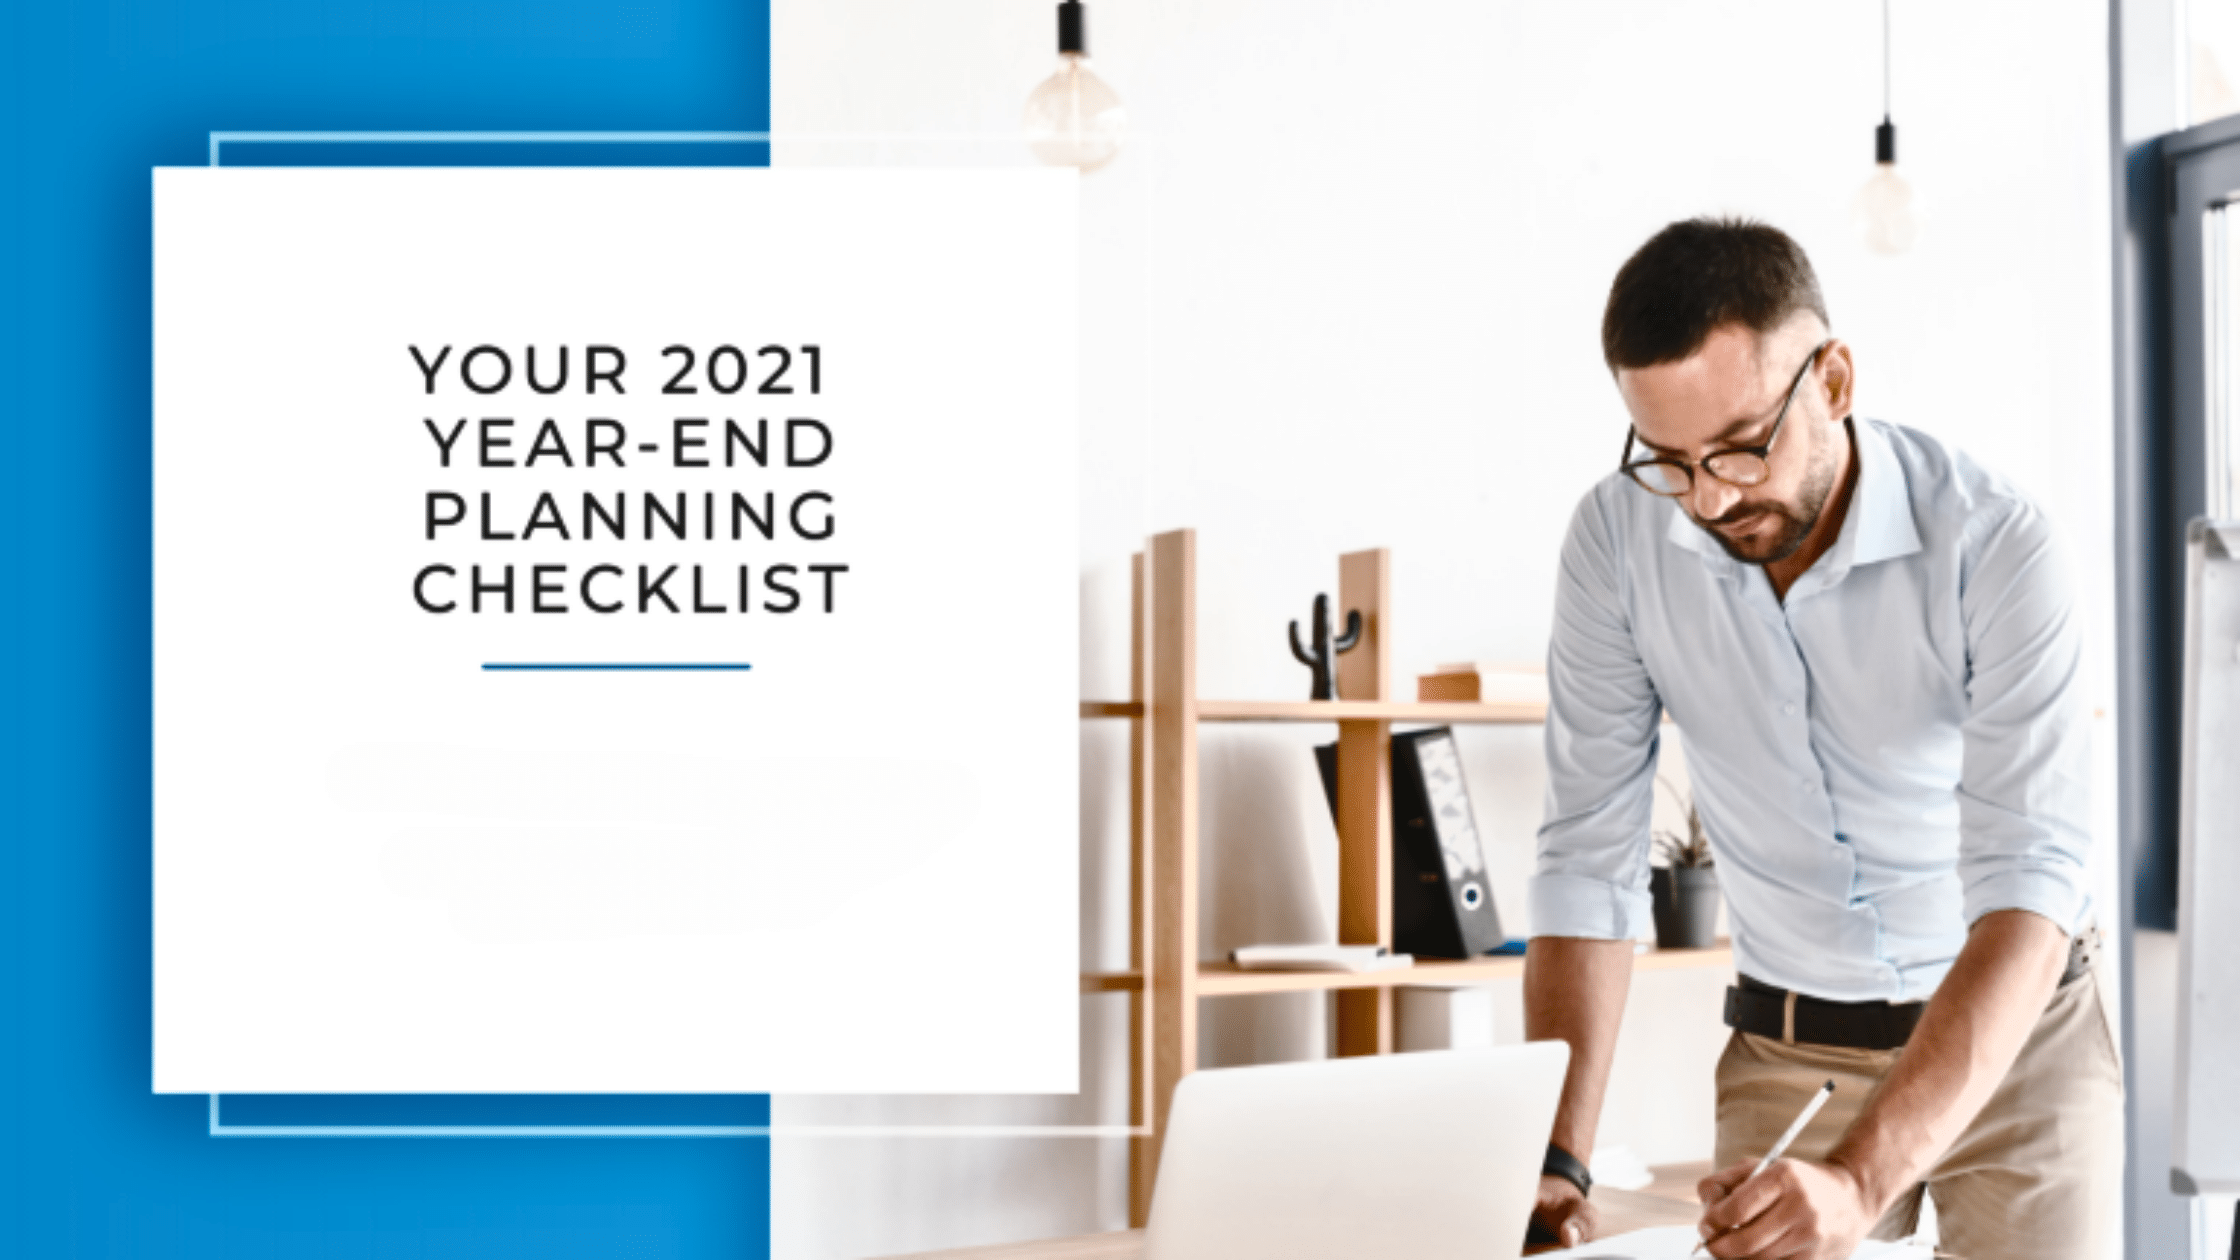 Your 2021 Year-End Planning Checklist